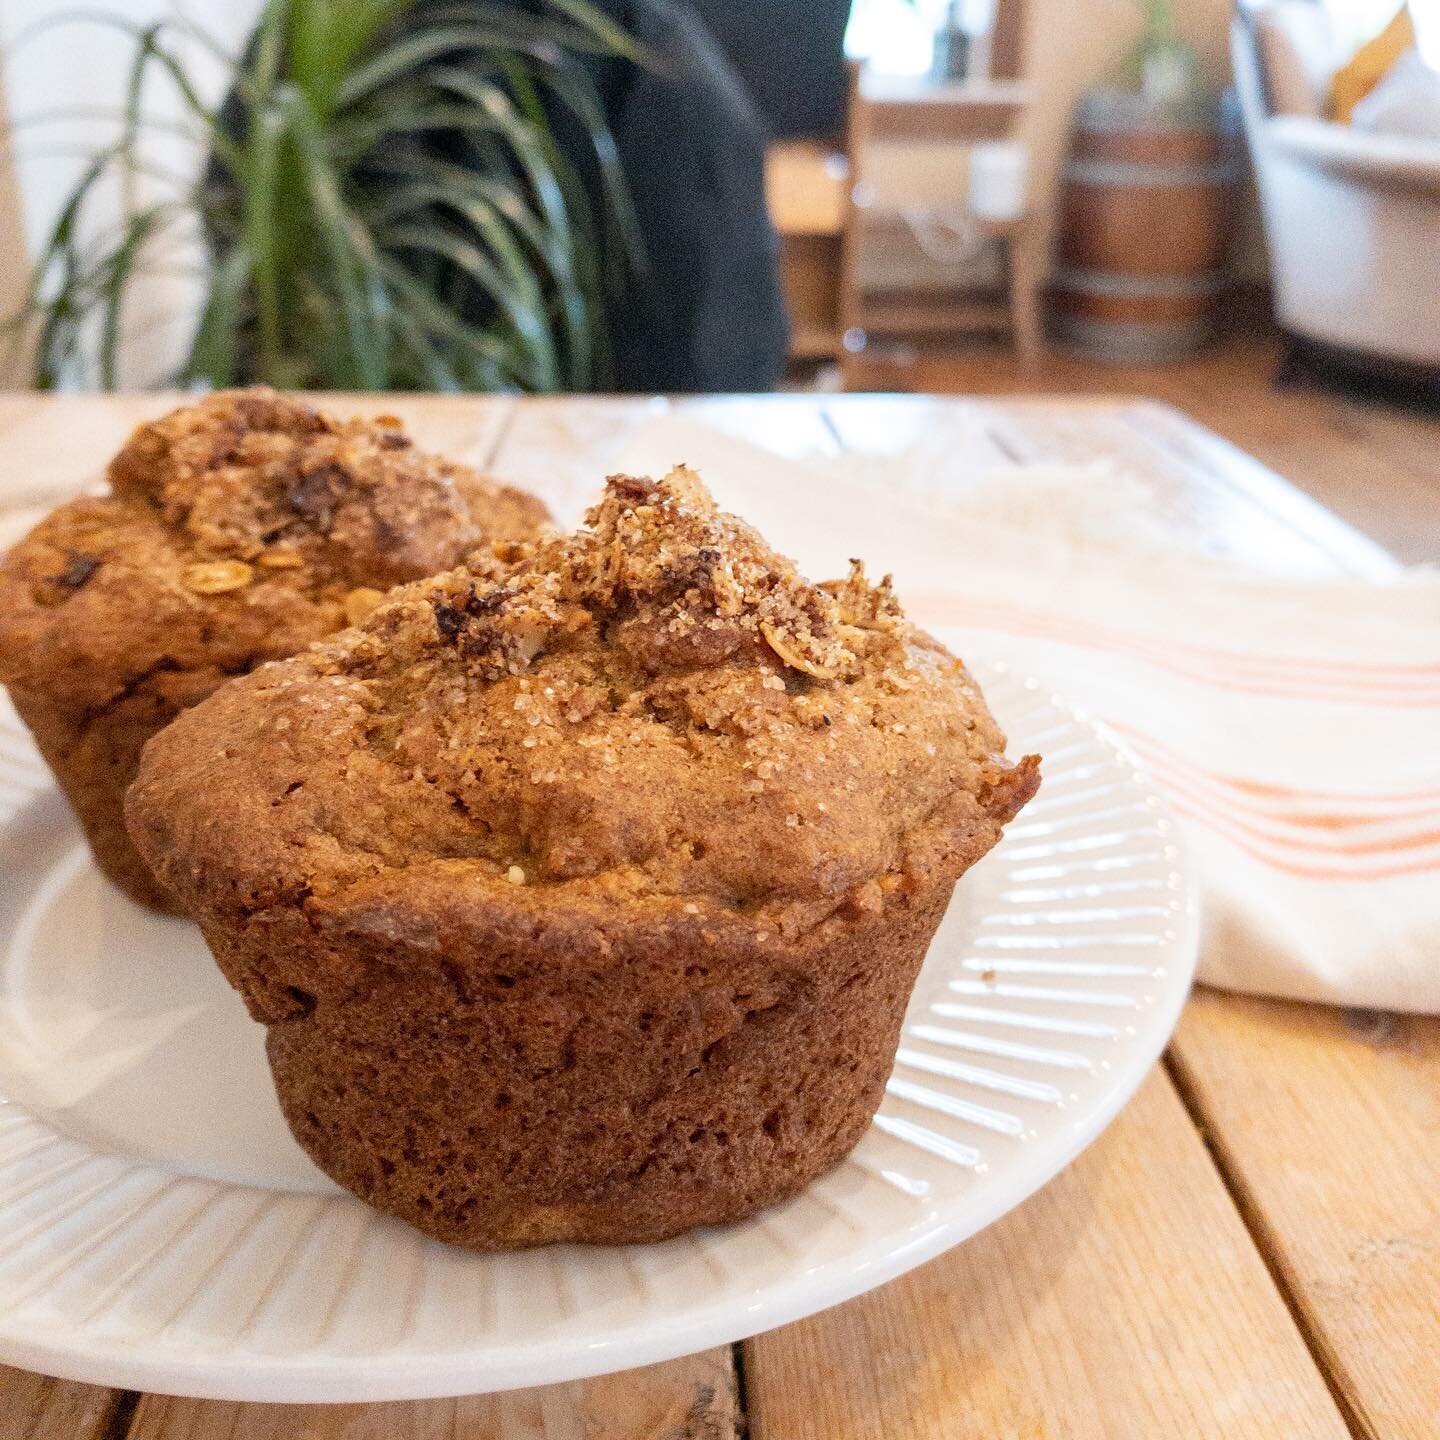 Our carrot &amp; oat muffins are gluten free &amp; made with ingredients like organic cane sugar, avocado oil &amp; real vanilla extract, making them the perfect simple &amp; delicious treat for your Saturday afternoon! 😍

Open today until 3PM 

#st